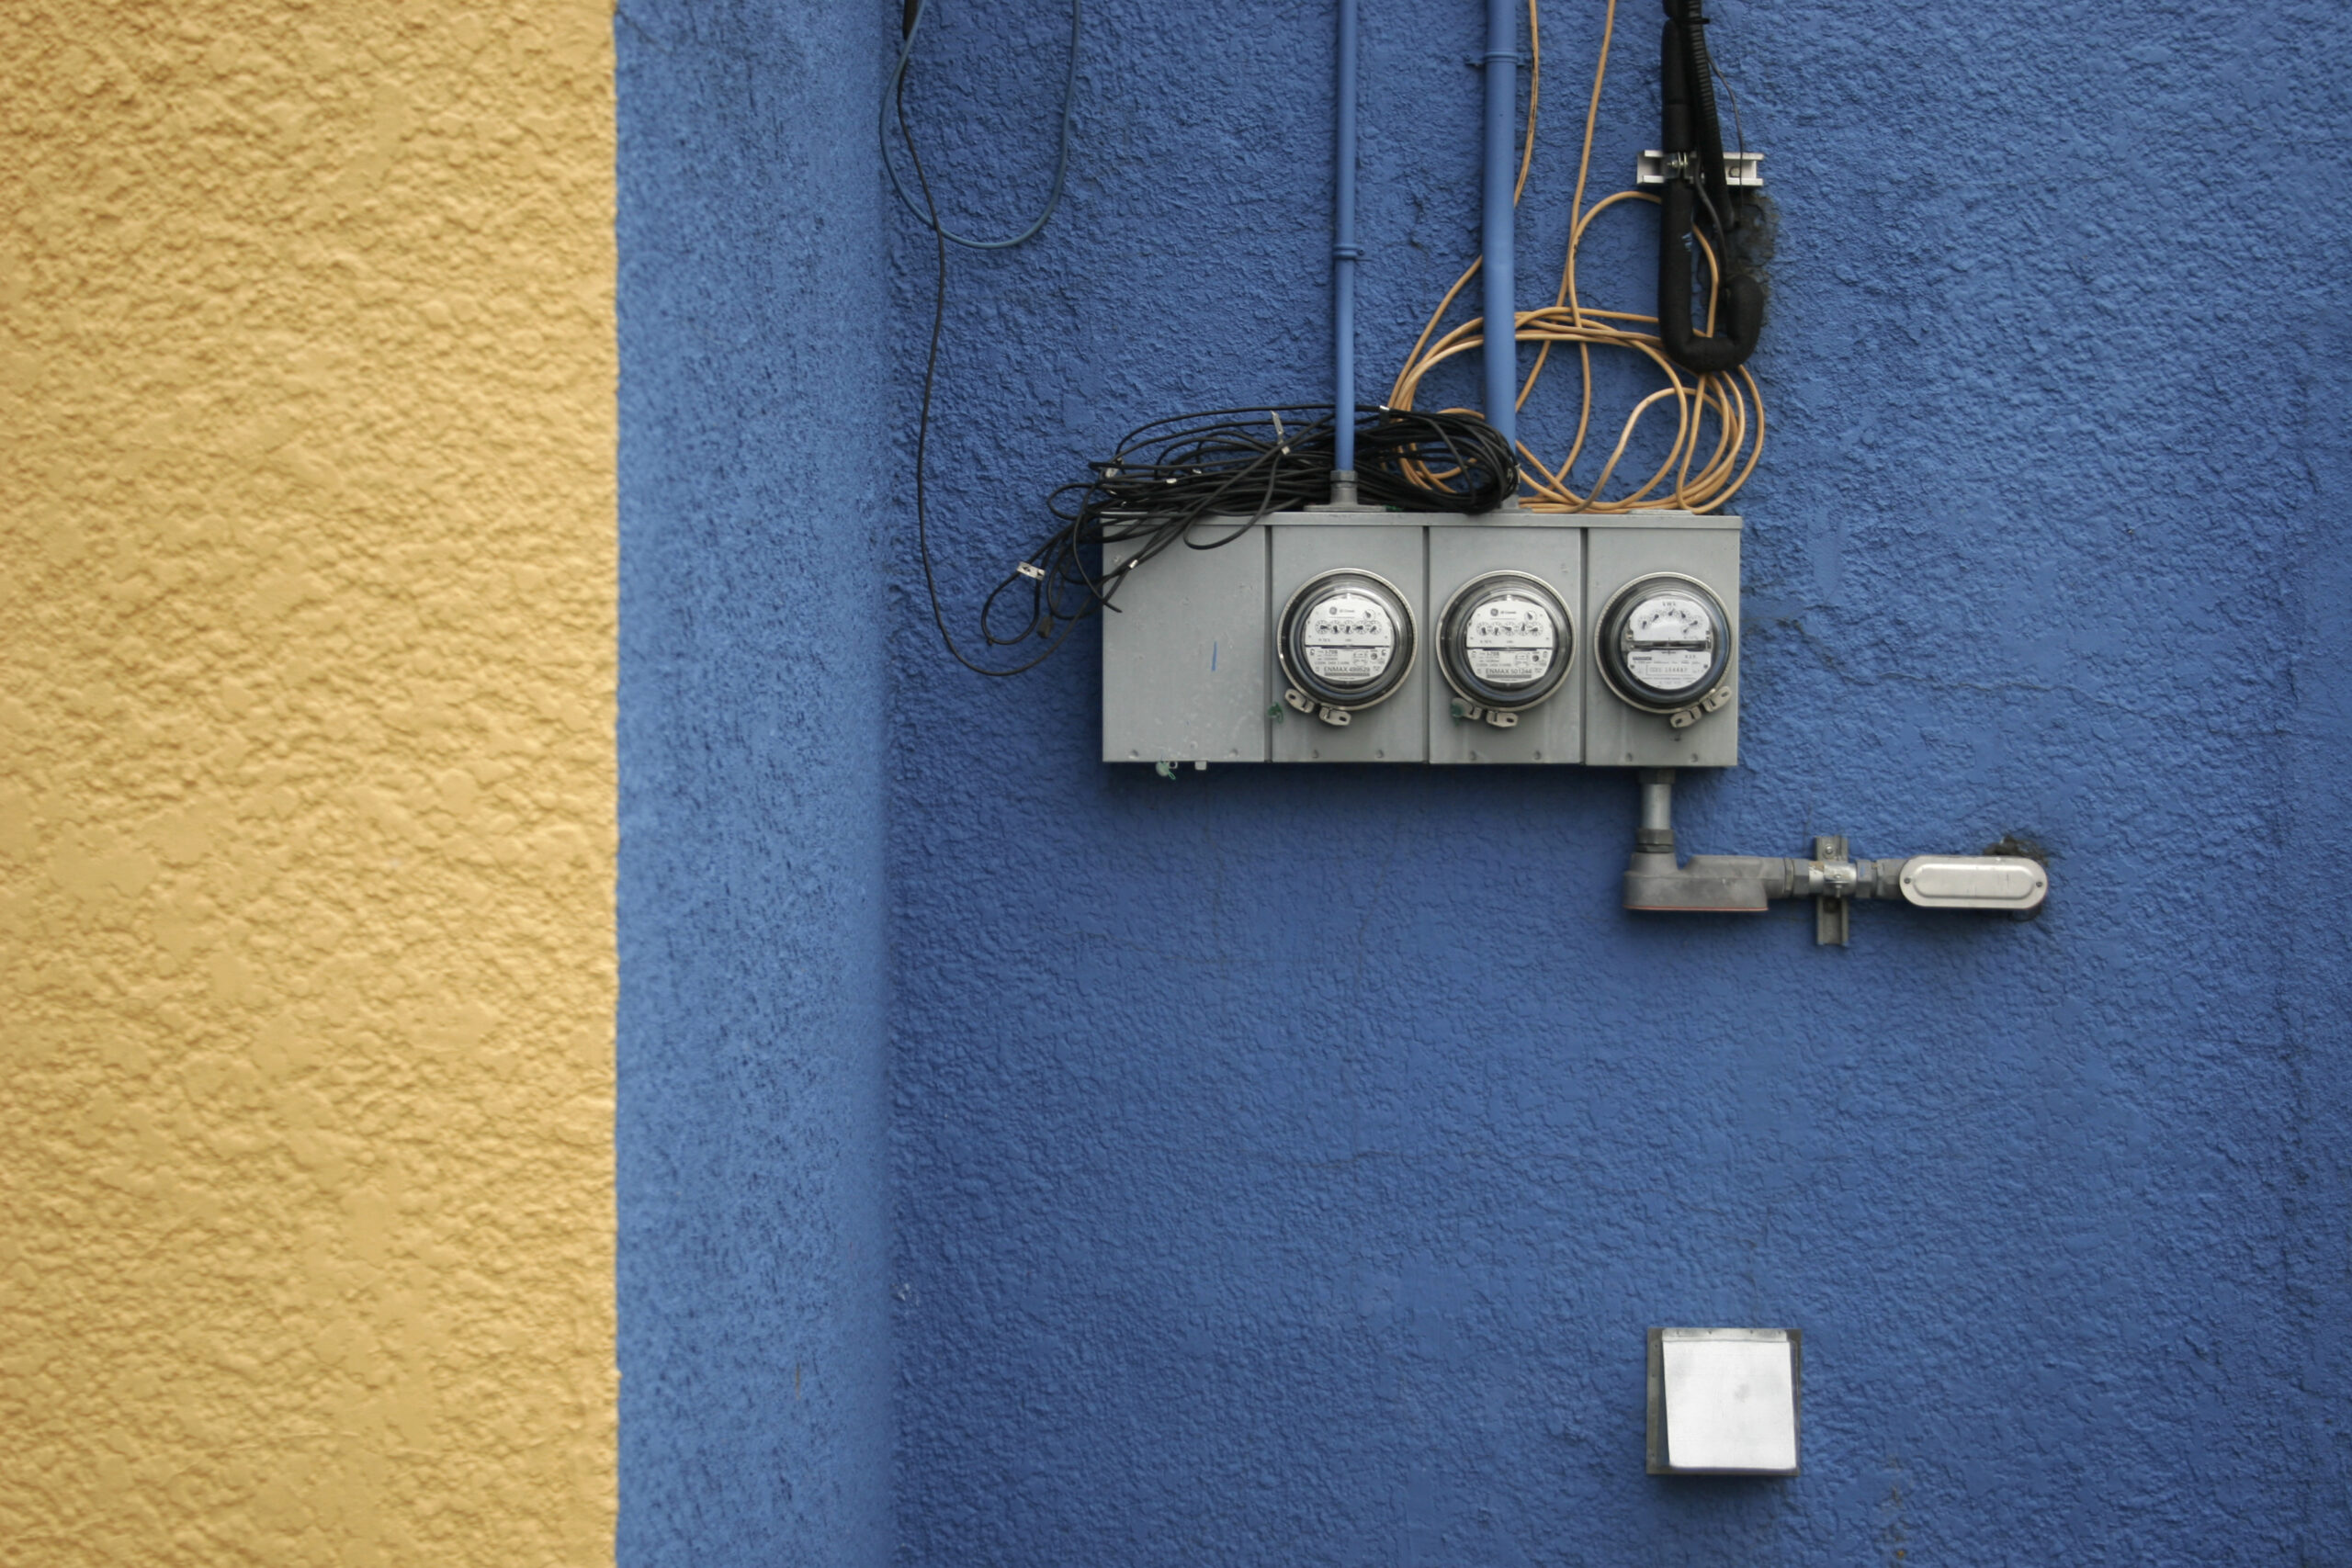 Yellow and blue stucco wall decorated with a scattershot corsage of electric meters, conduit and wiring.